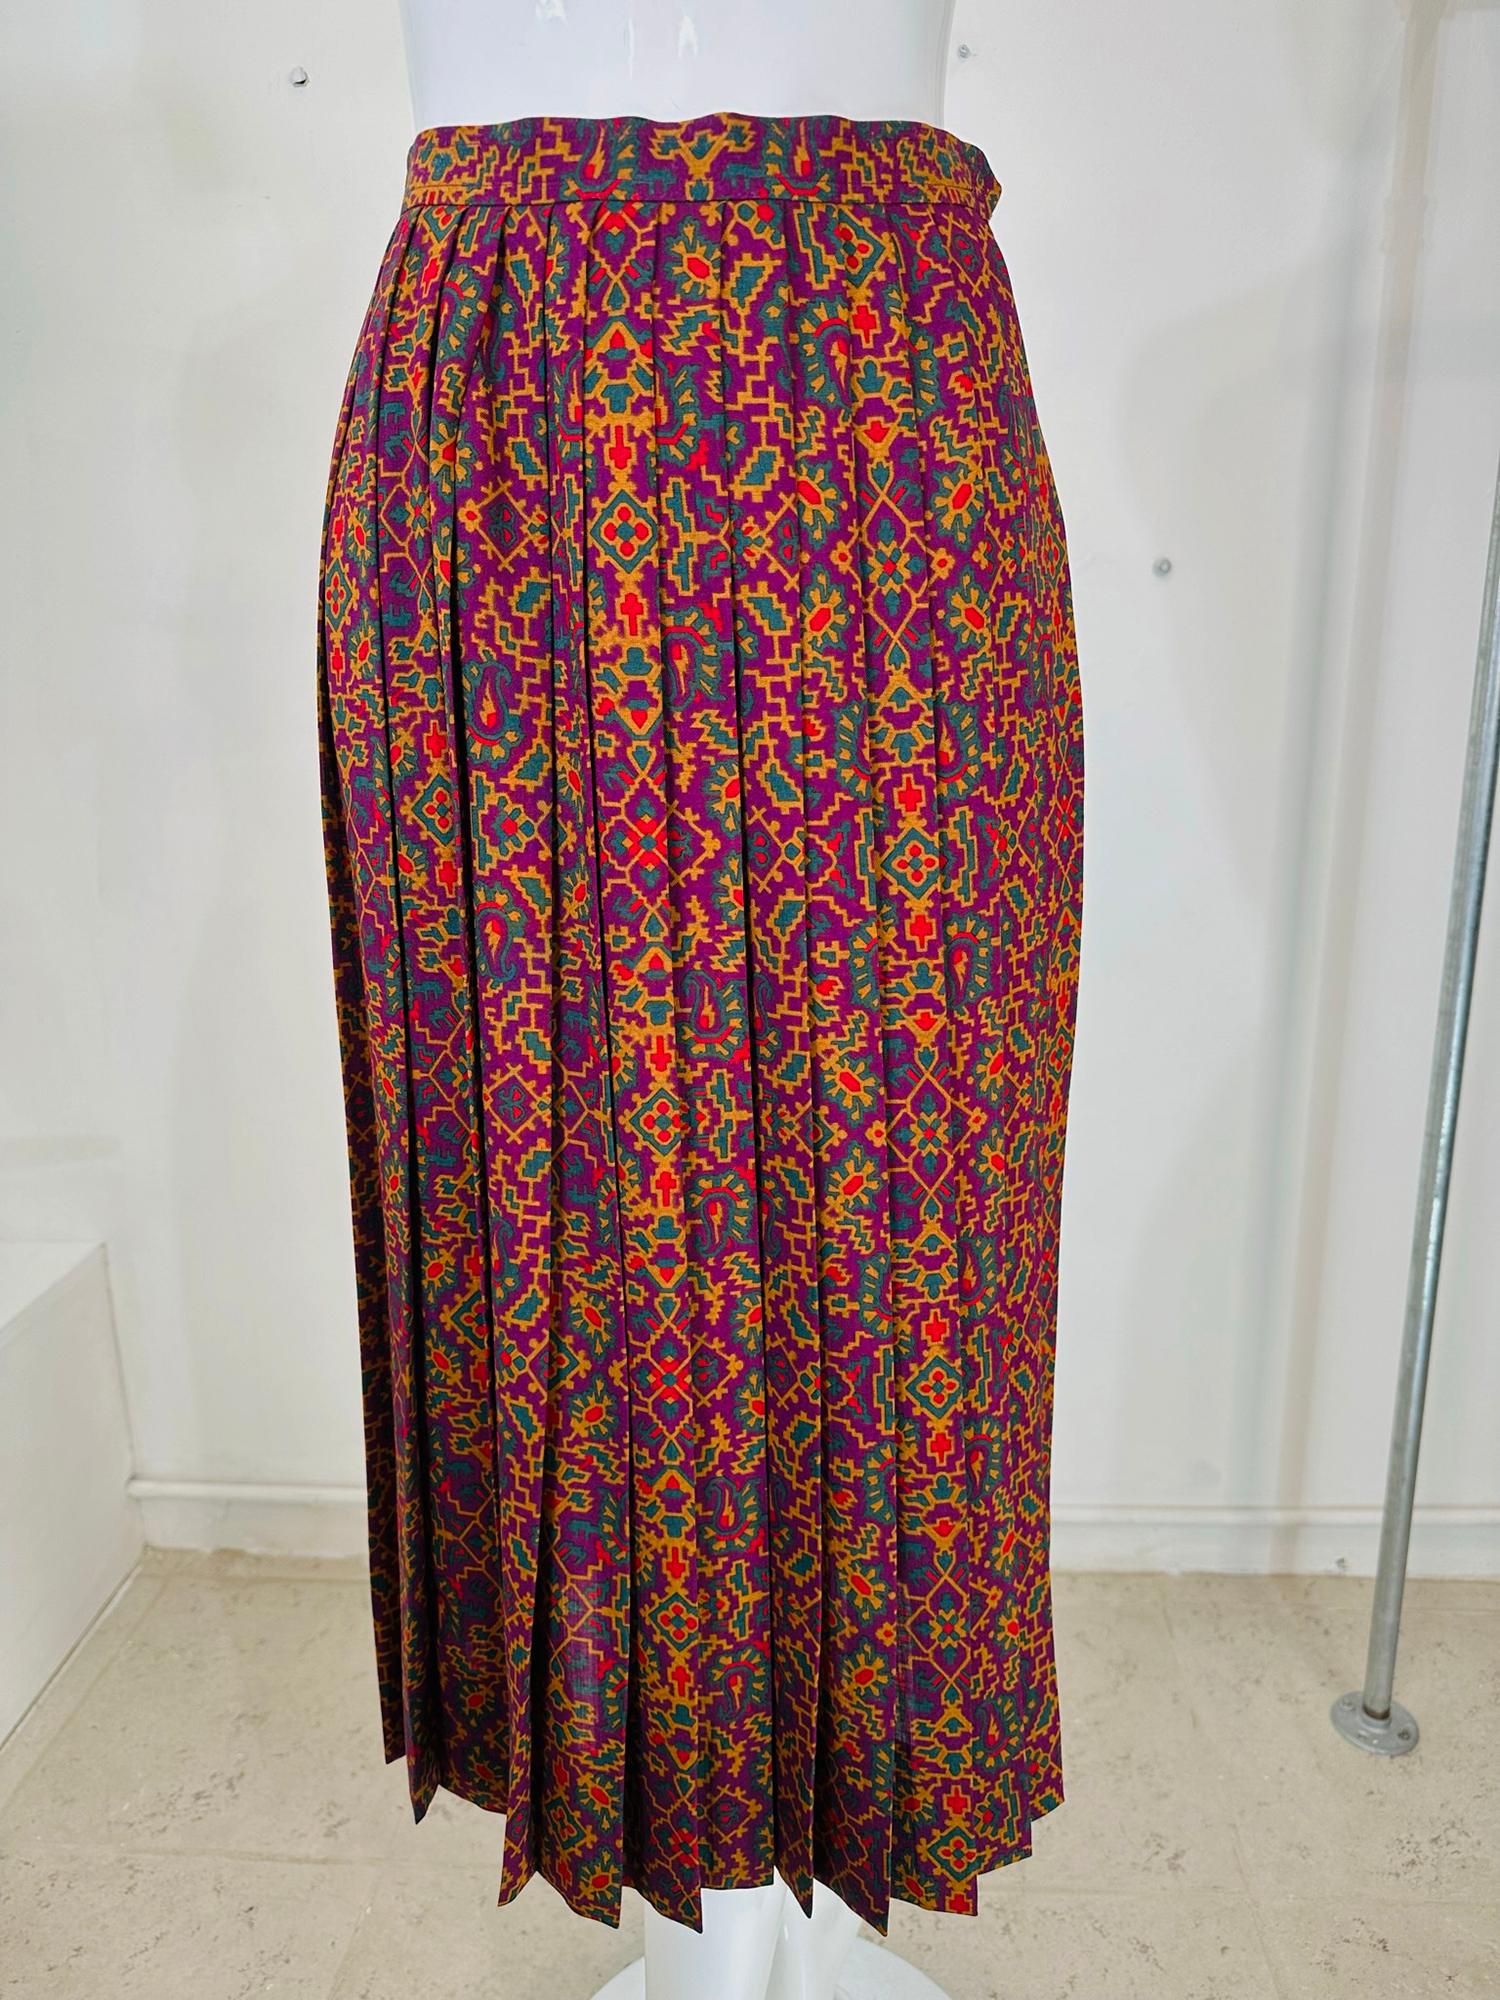 Vintage Yves Saint Laurent Rive Gauche  moorish print challis knife pleated skirt from the 1970s. Rich colour printed, fine wool fabric, in shades of purple, green, red and amber. Sharp open pleated skirt has a banded waist with a side painted metal